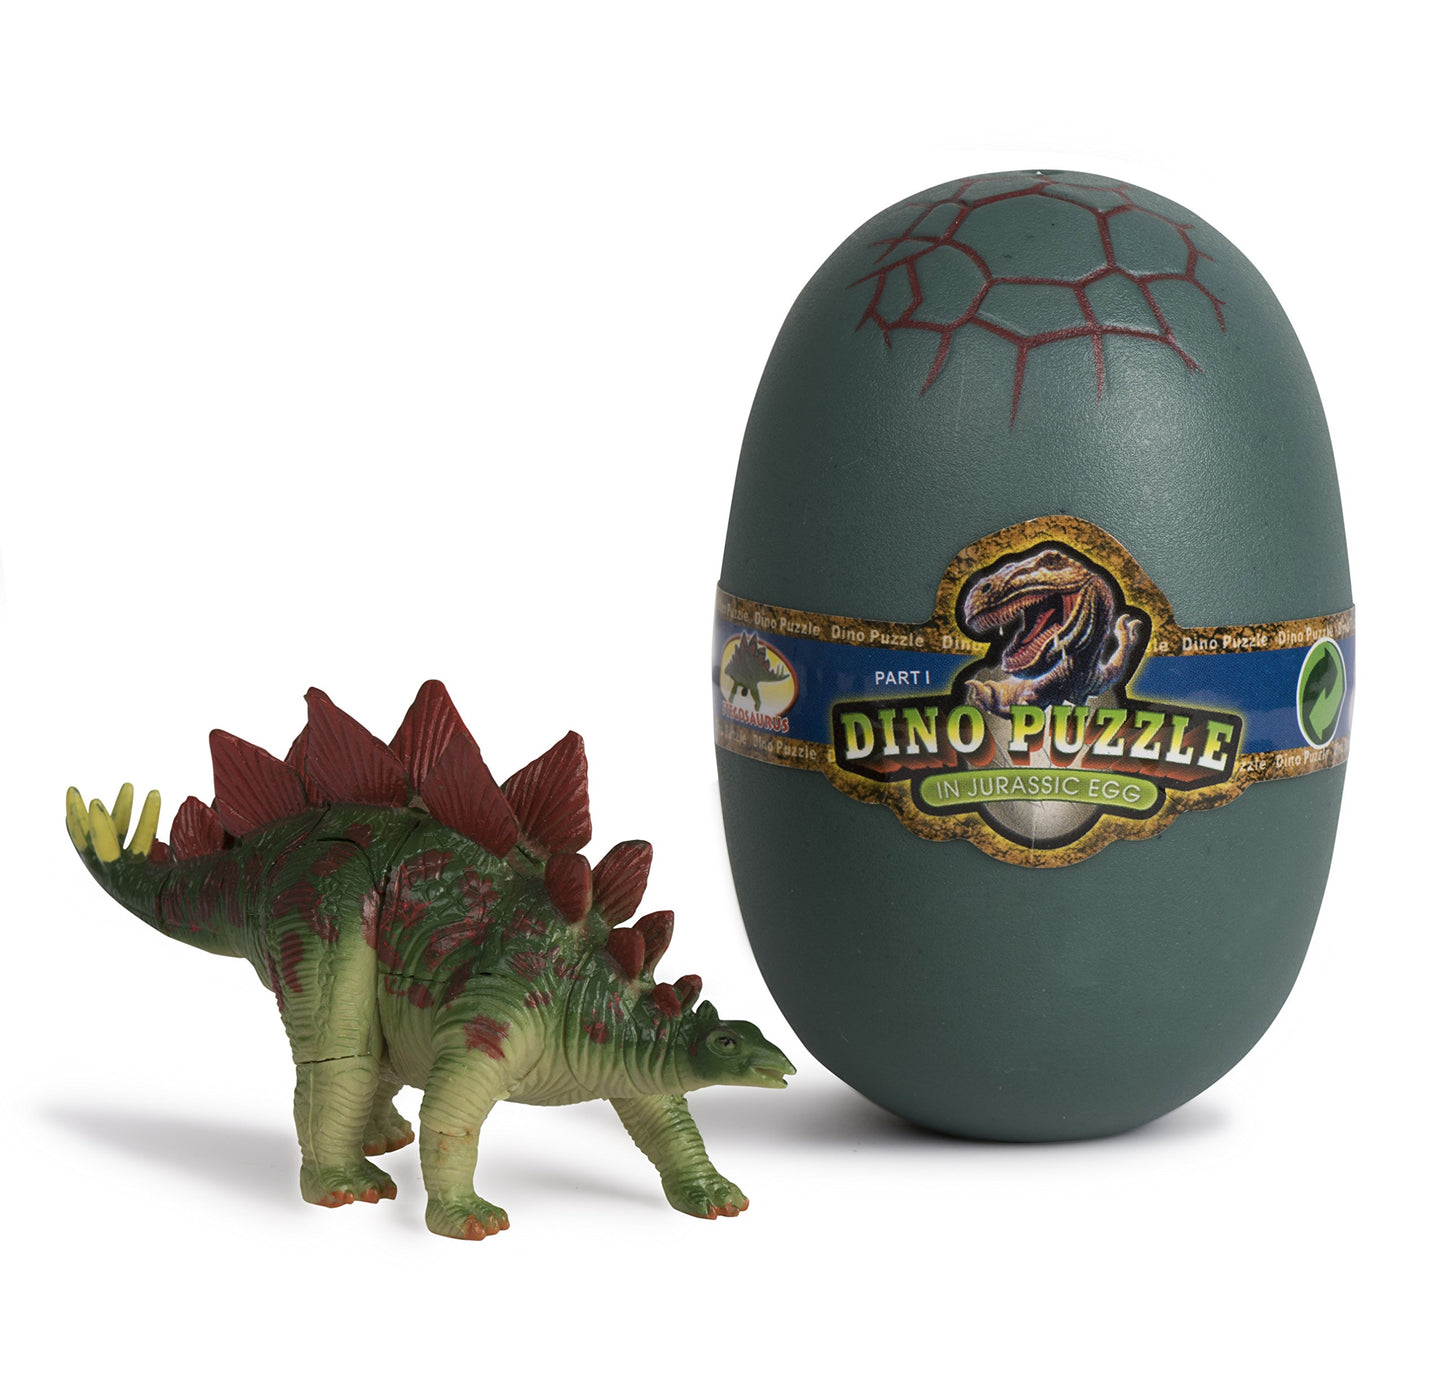 20 3D Dinosaur Puzzles In Dino Eggs - Jurassic Egg With Dinosaur Figures- Dinosaurs Toys For Kids Party Favors And Dinosaur Party, Easter Basket Fillers Easter Eggs Toys For Boys